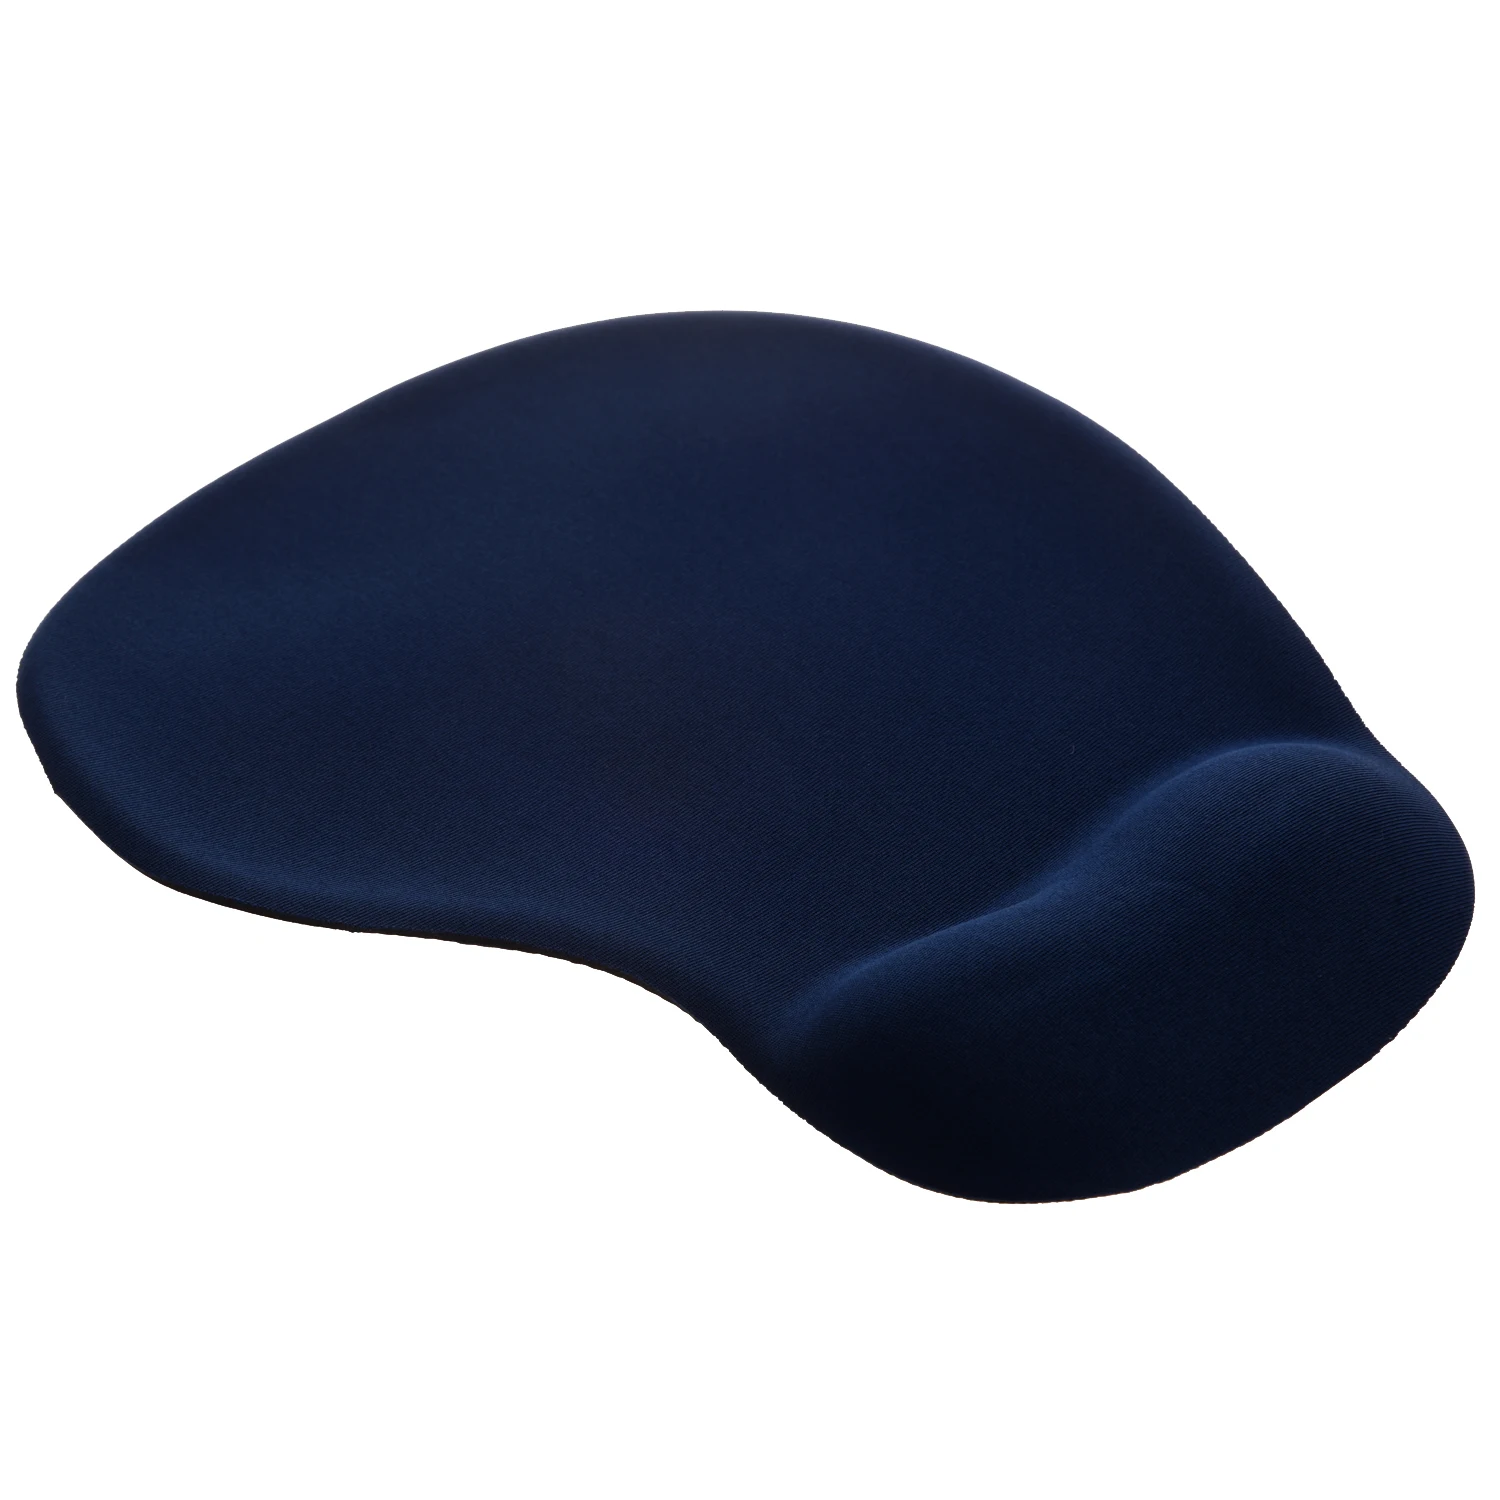 Blue Comfort Wrist Silicone Gel Rest Support Mat Mouse Mice Pad In